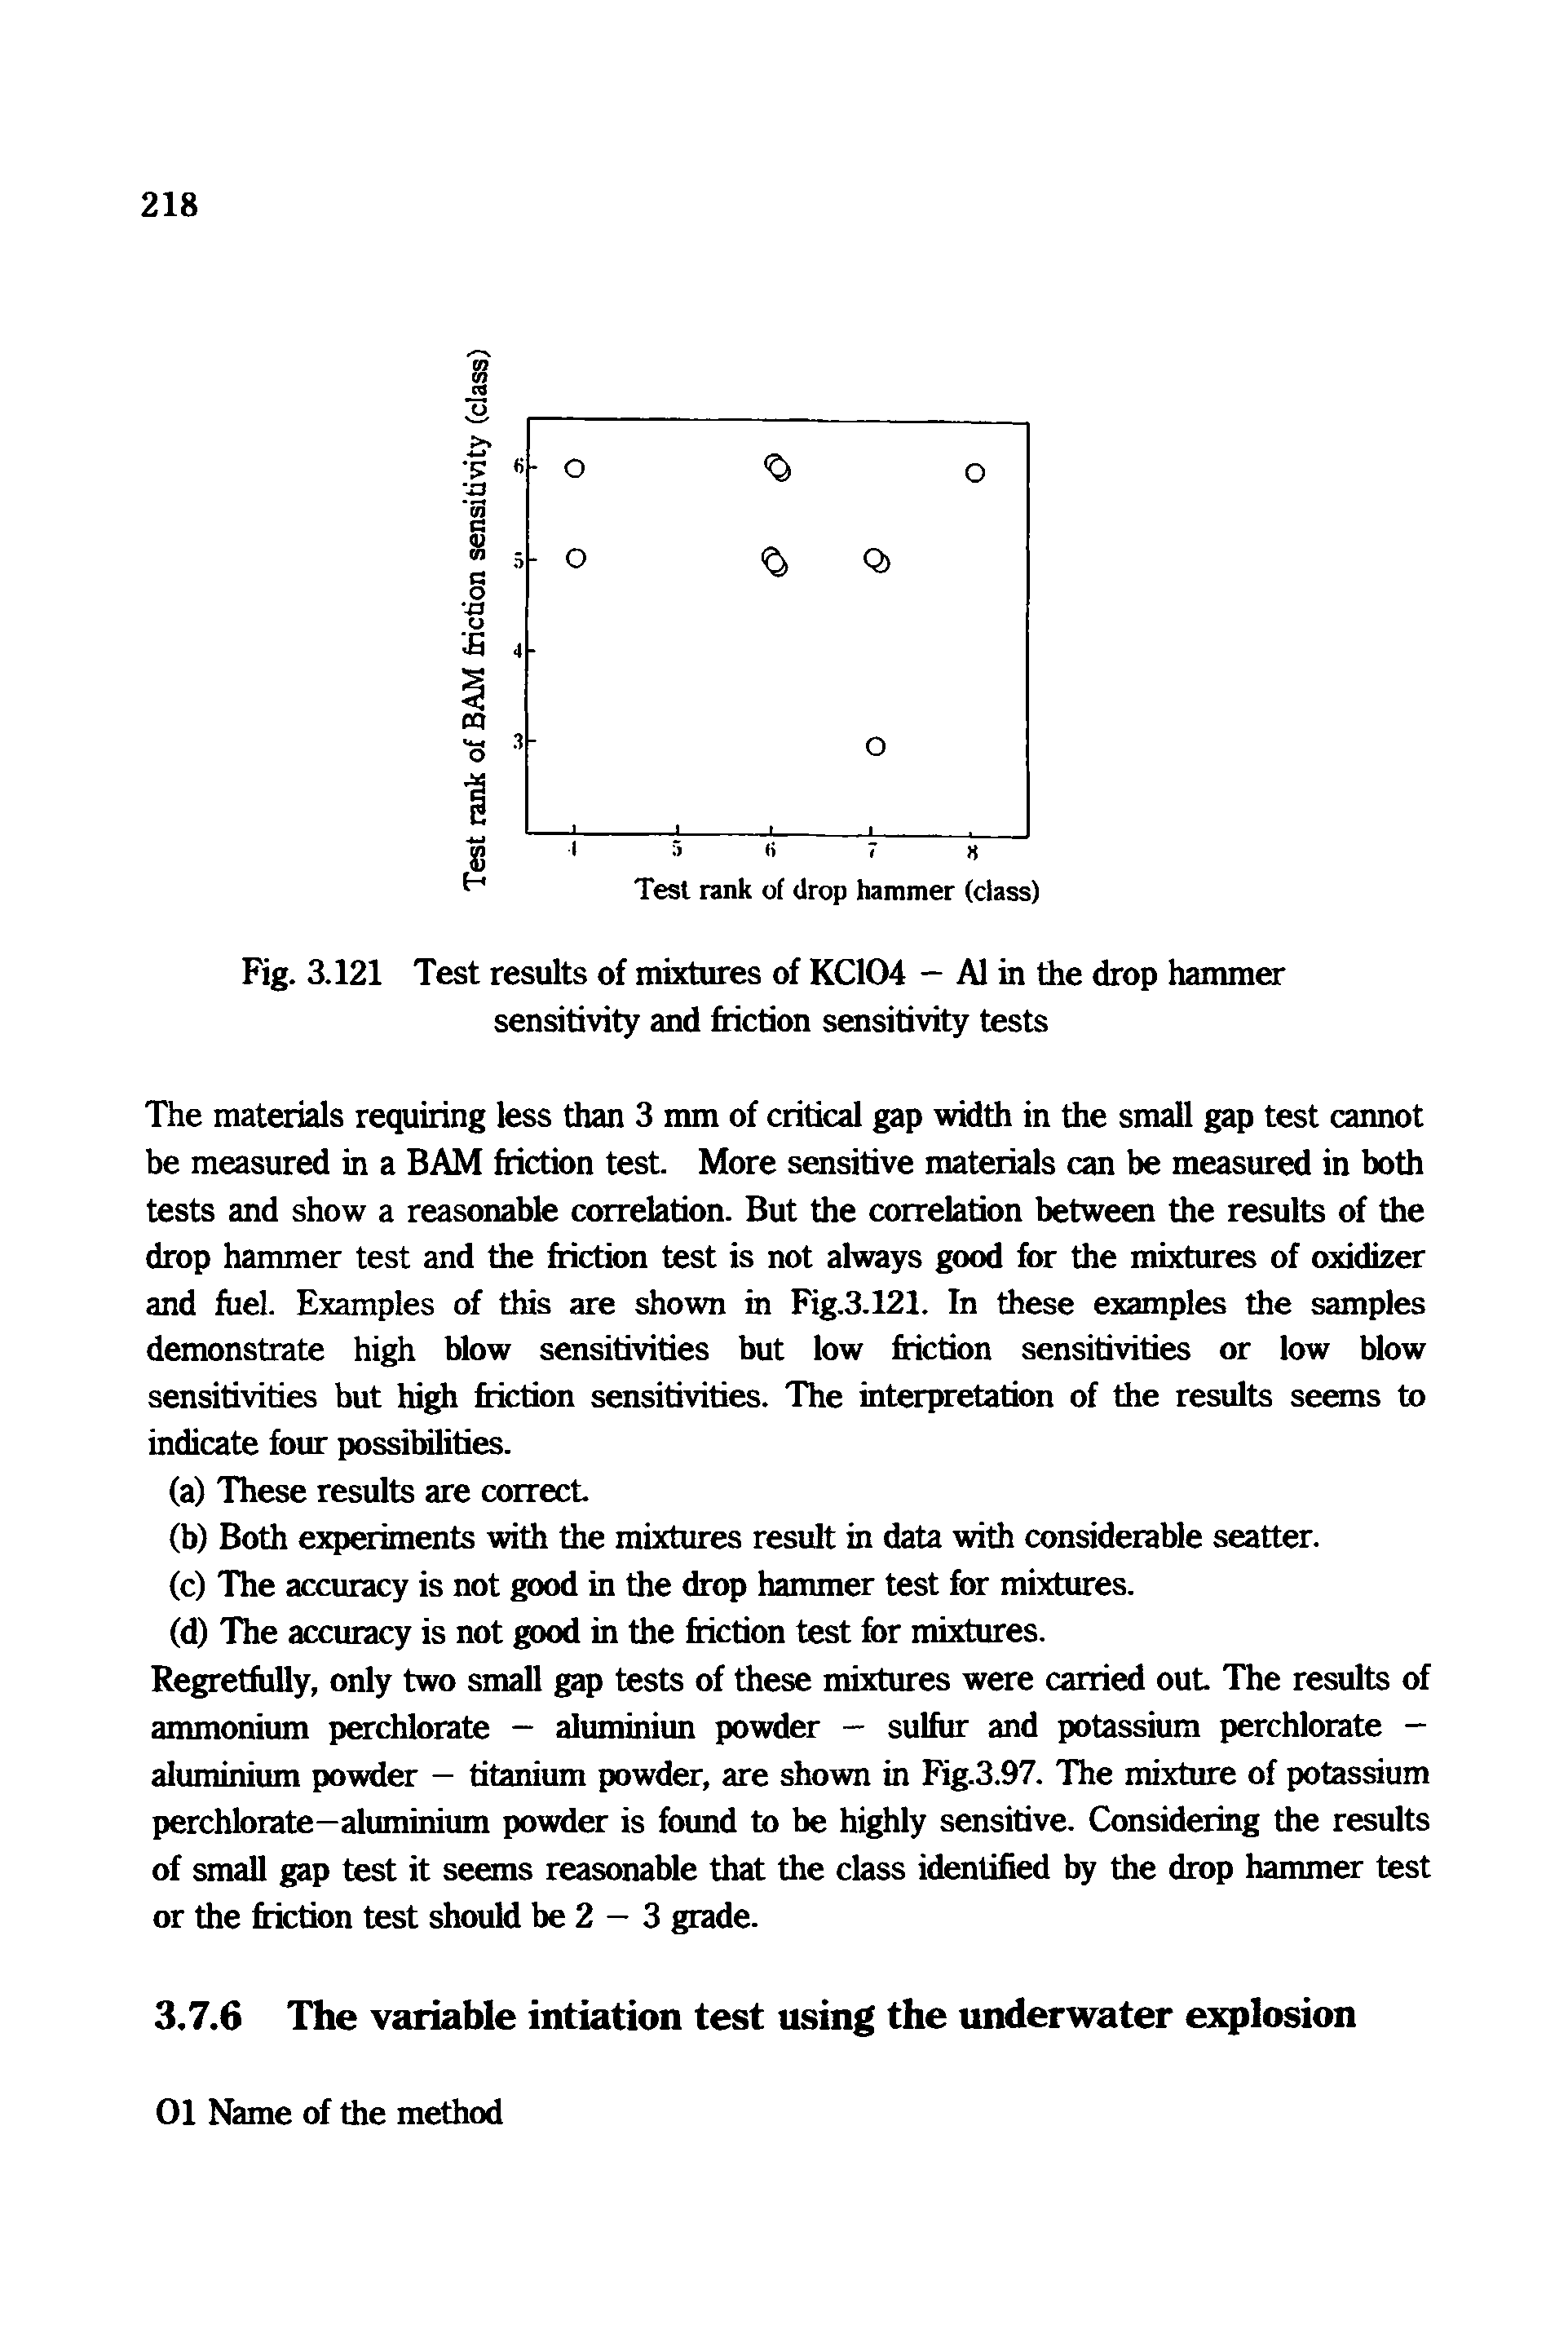 Fig. 3.121 Test results of mixtures of KC104 - A1 in the drop hammer sensitivity and friction sensitivity tests...